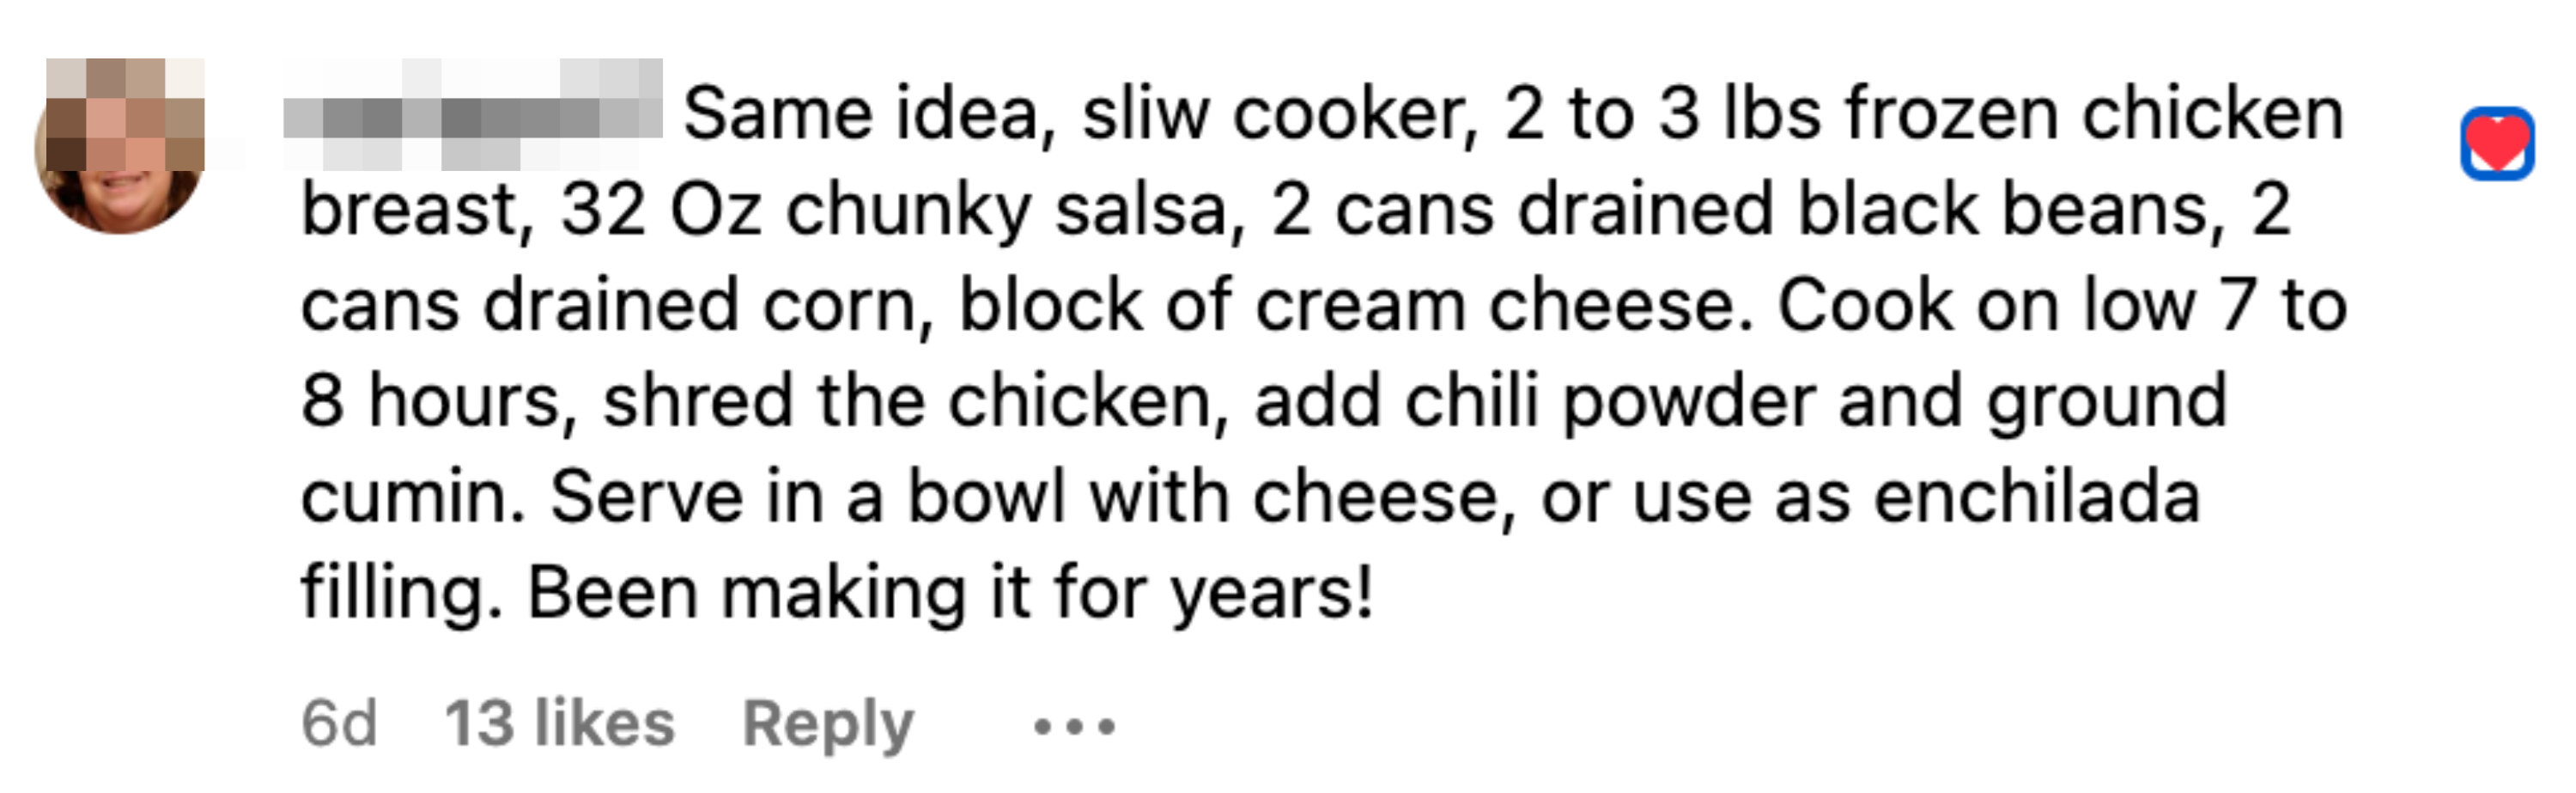 Slow cooker, 2 to 3 lbs frozen chicken breast, 32 OZ chunky salsa, 2 cans drained black beans, 2 cans drained corn, block of cream cheese. Cook low 7 to 8 hours, shred the chicken, add chili powder, cumin. Serve with cheese, or use a enchilada filling.